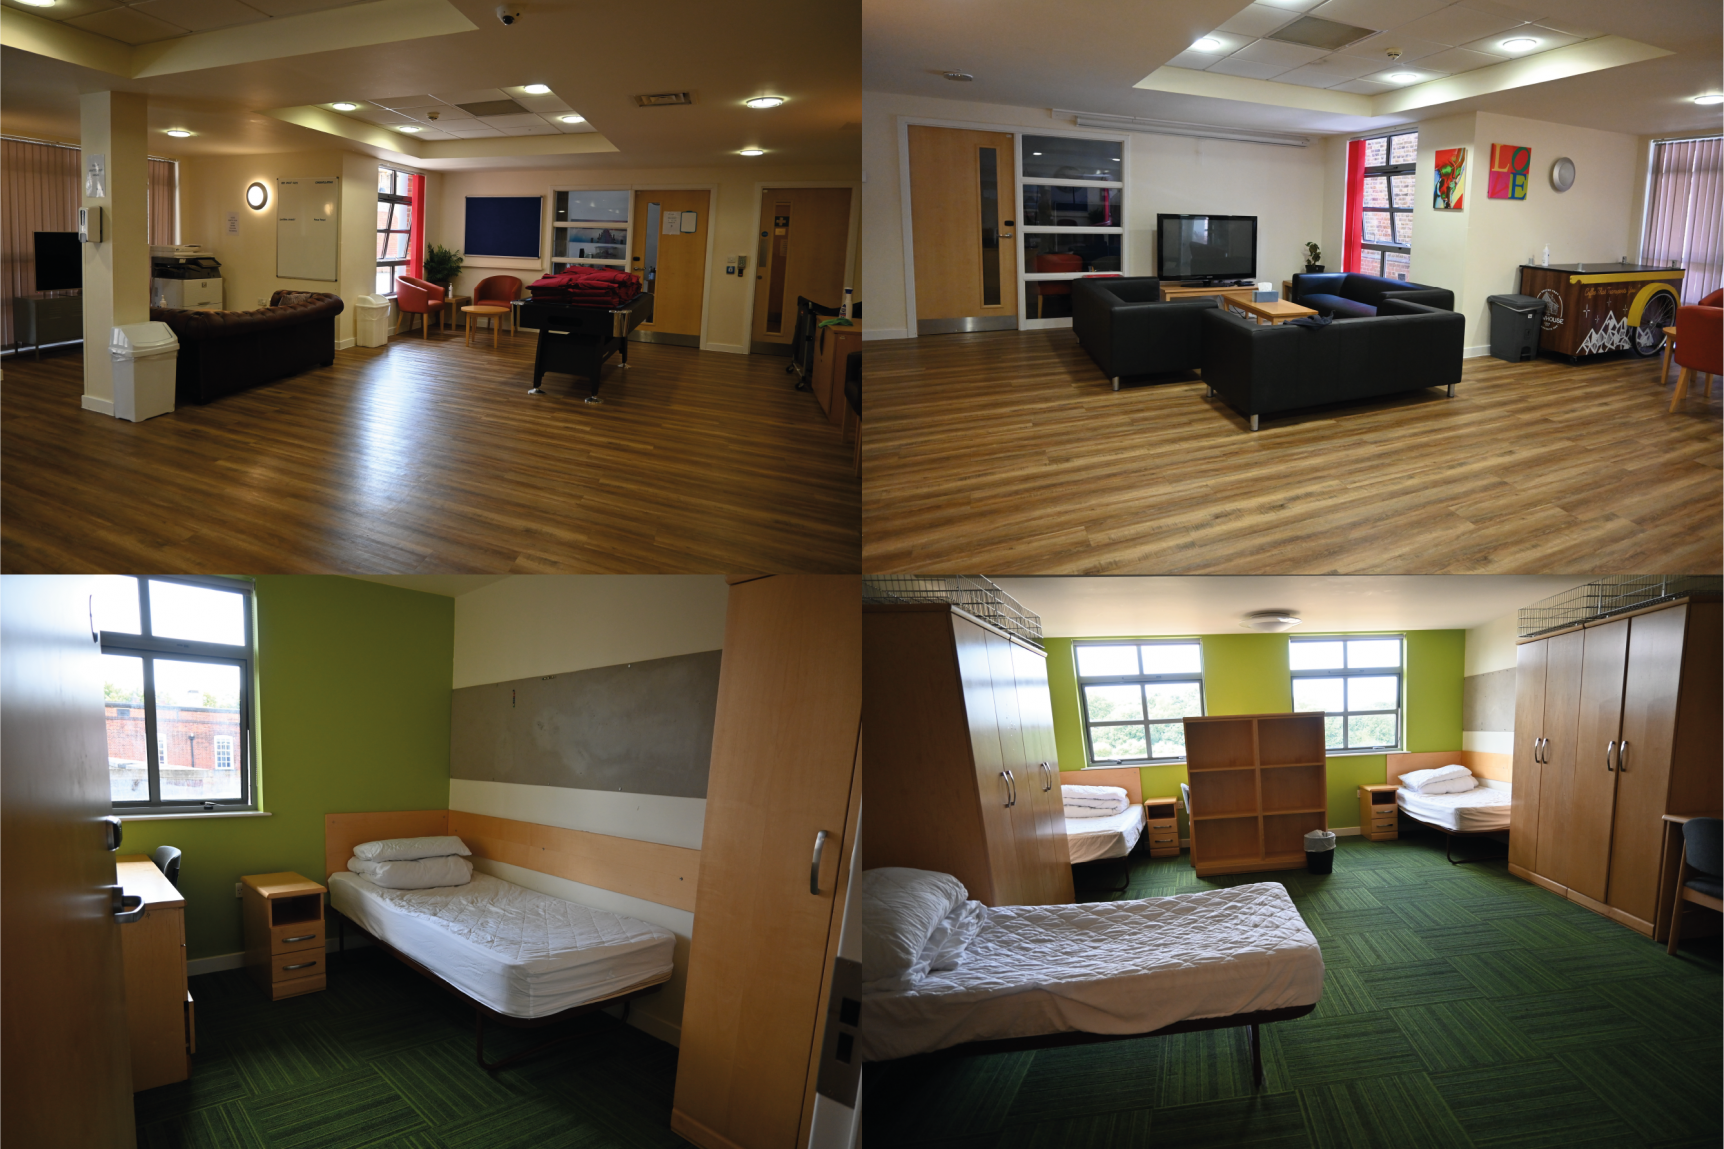 A square of four images of the accommadation at the SUmmer School. Top left and right image are photos of the common room featuring couches, a TV and a pool table. The bottom left picture is a photo of a single bedroom with a wardobe and a window. The bottom right picture is a photo of a shared bedroom with 3 single beds visible as well as wardrobes.